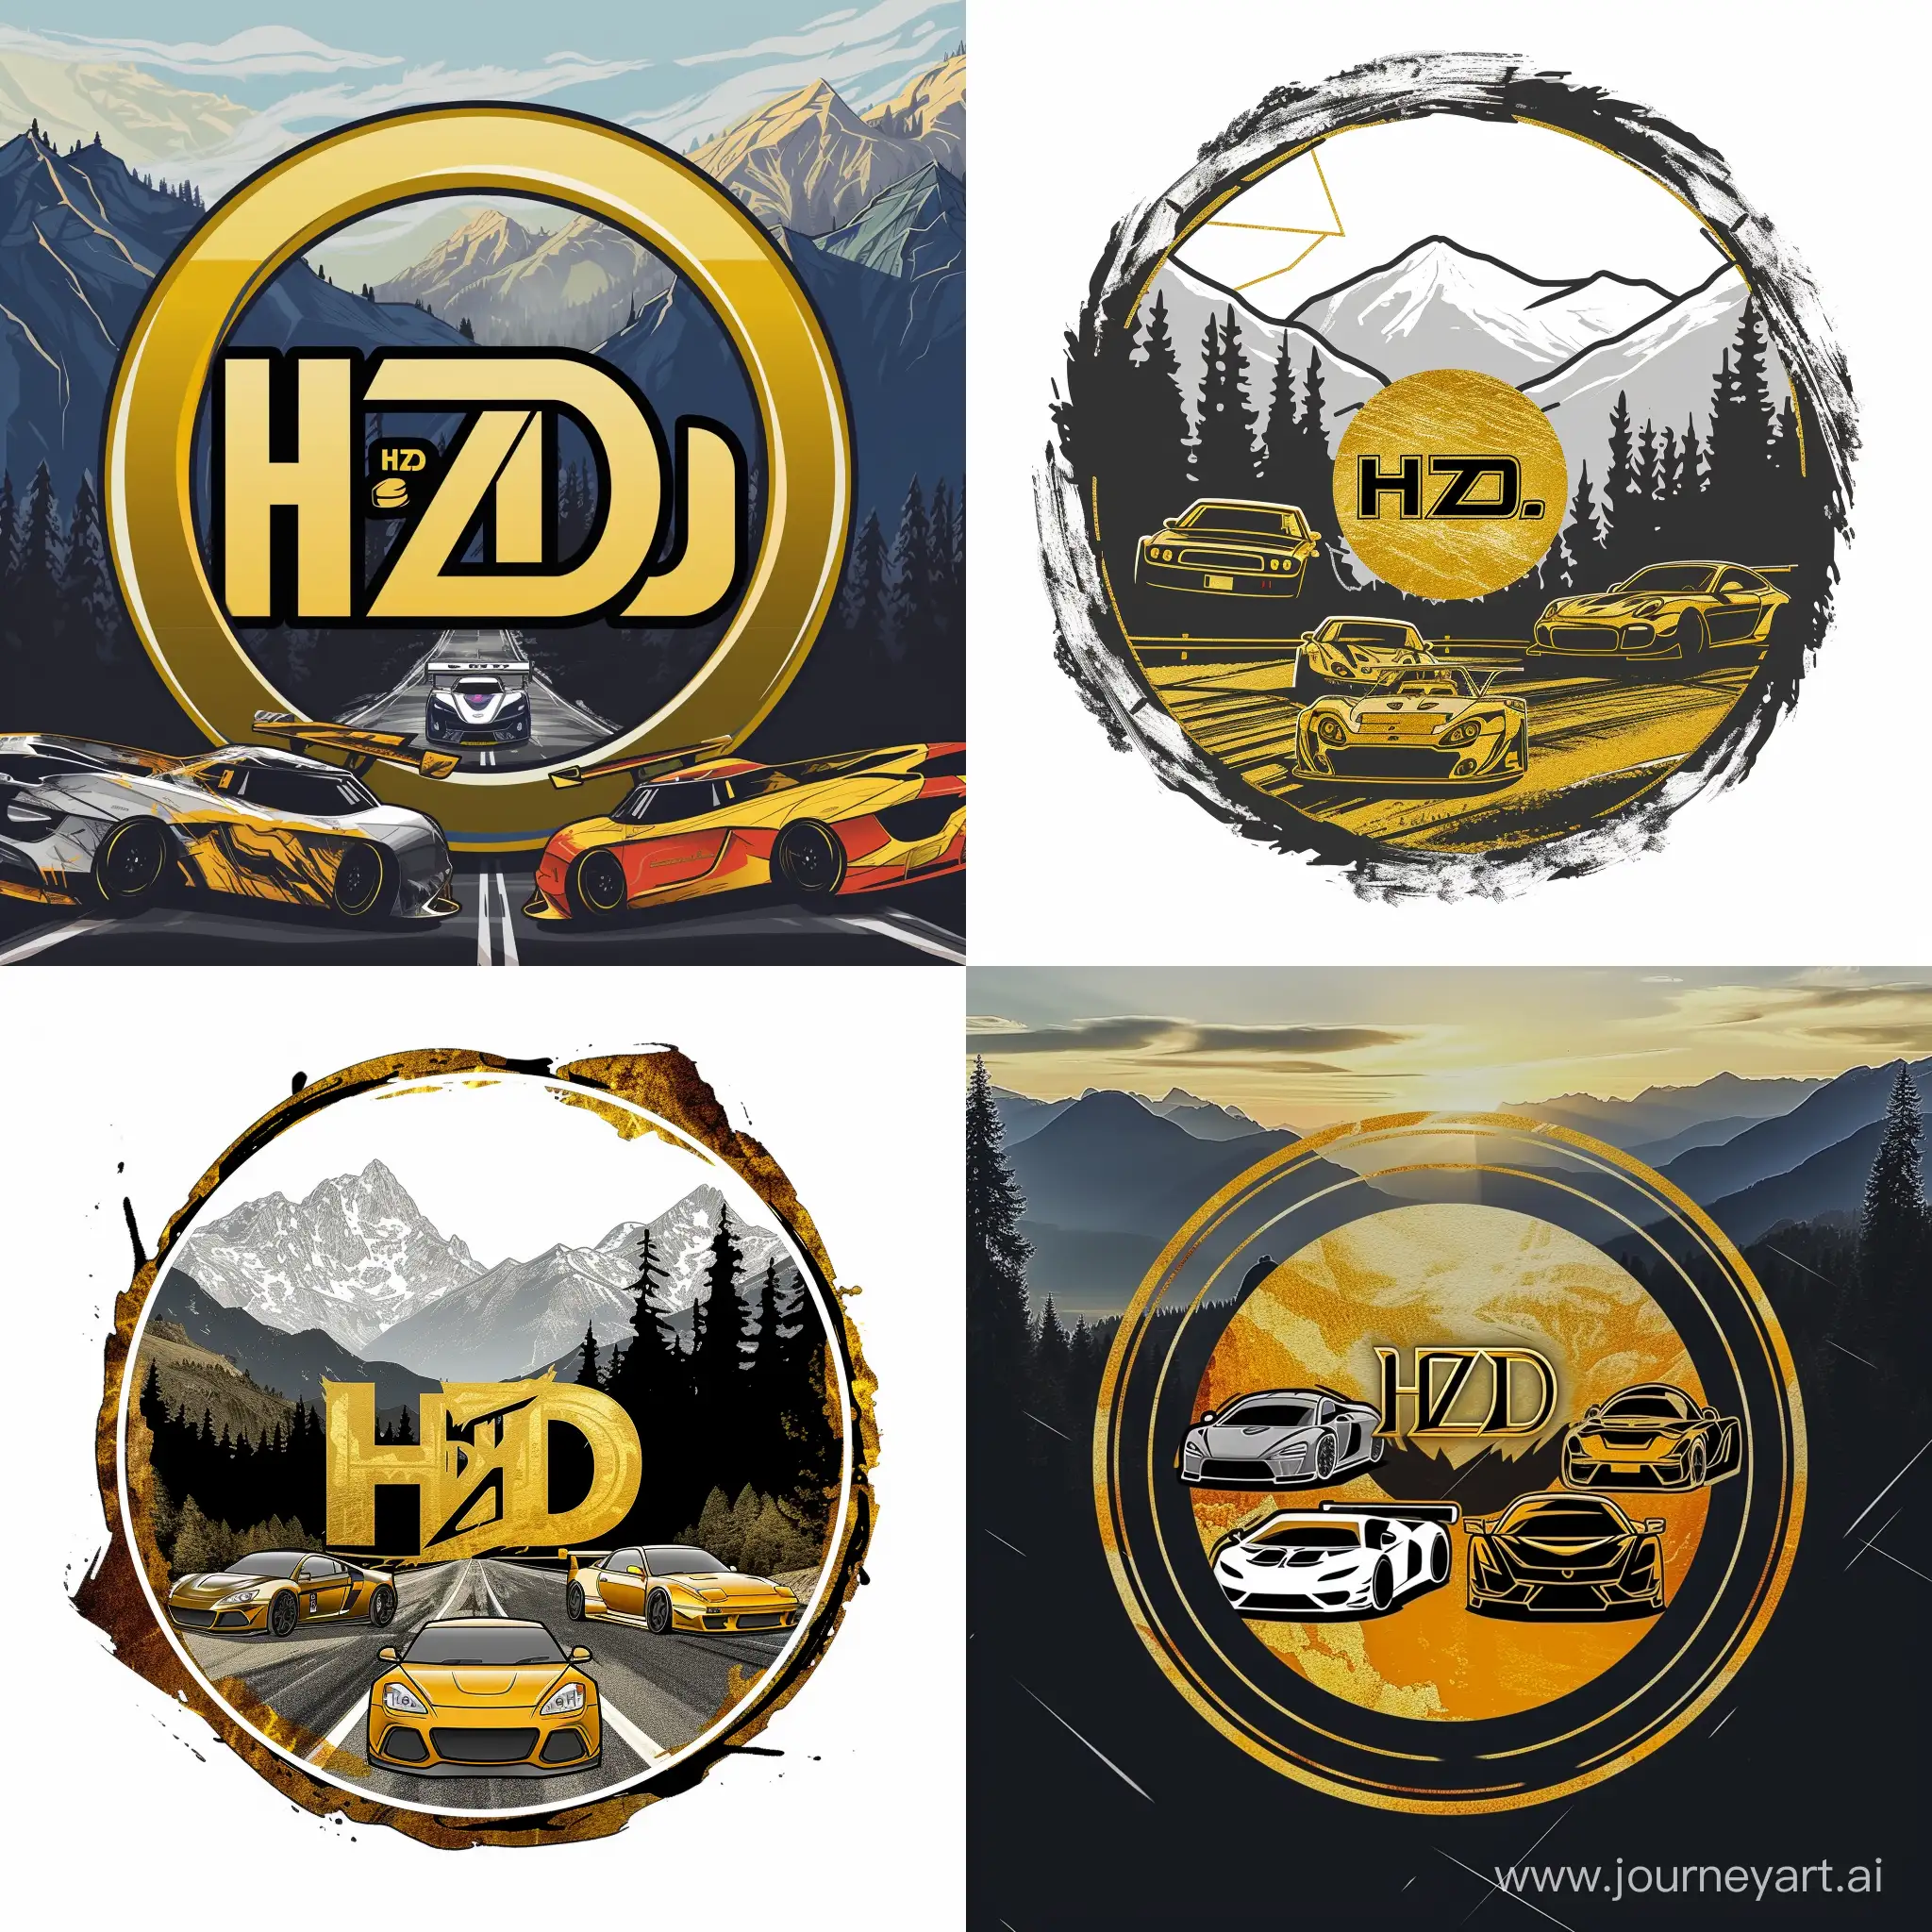 draw style car race logo in circle shape, some racing cars, gold main color
with HZD tag in the middle, mountains with trees with road in backround